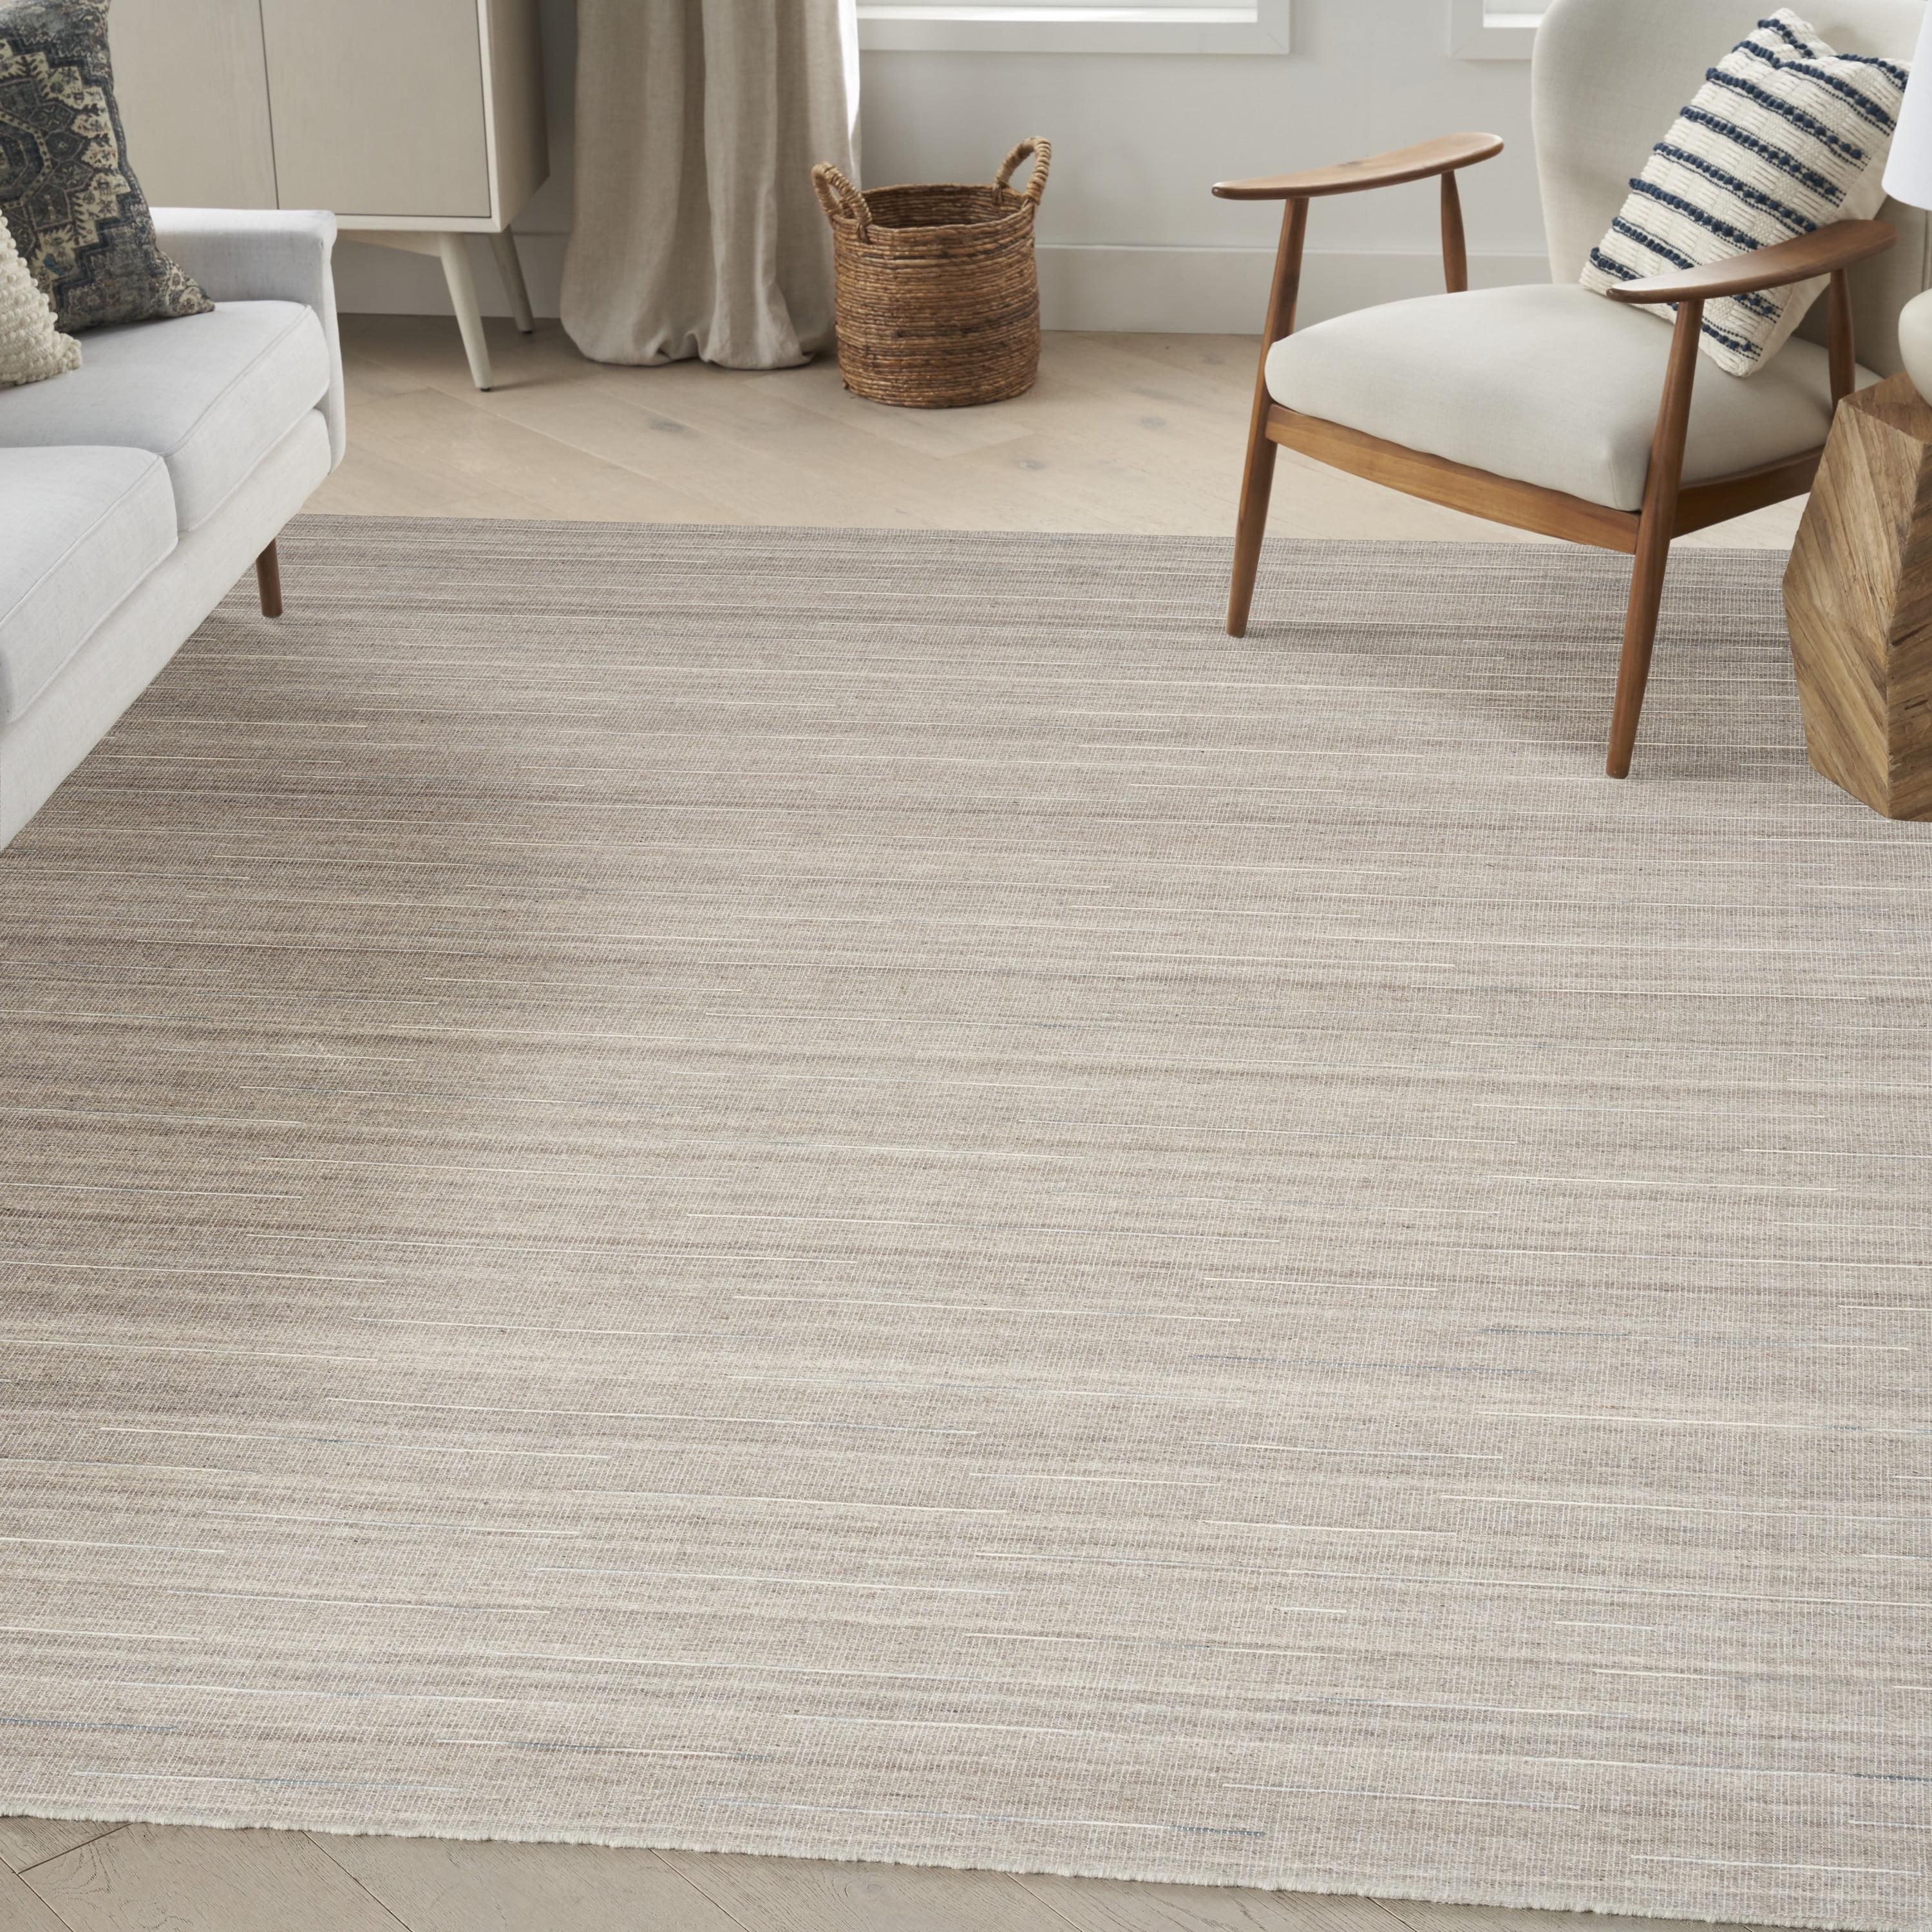 Interweave Modern Gray Ombre Wool 5'3" x 7'3" Area Rug